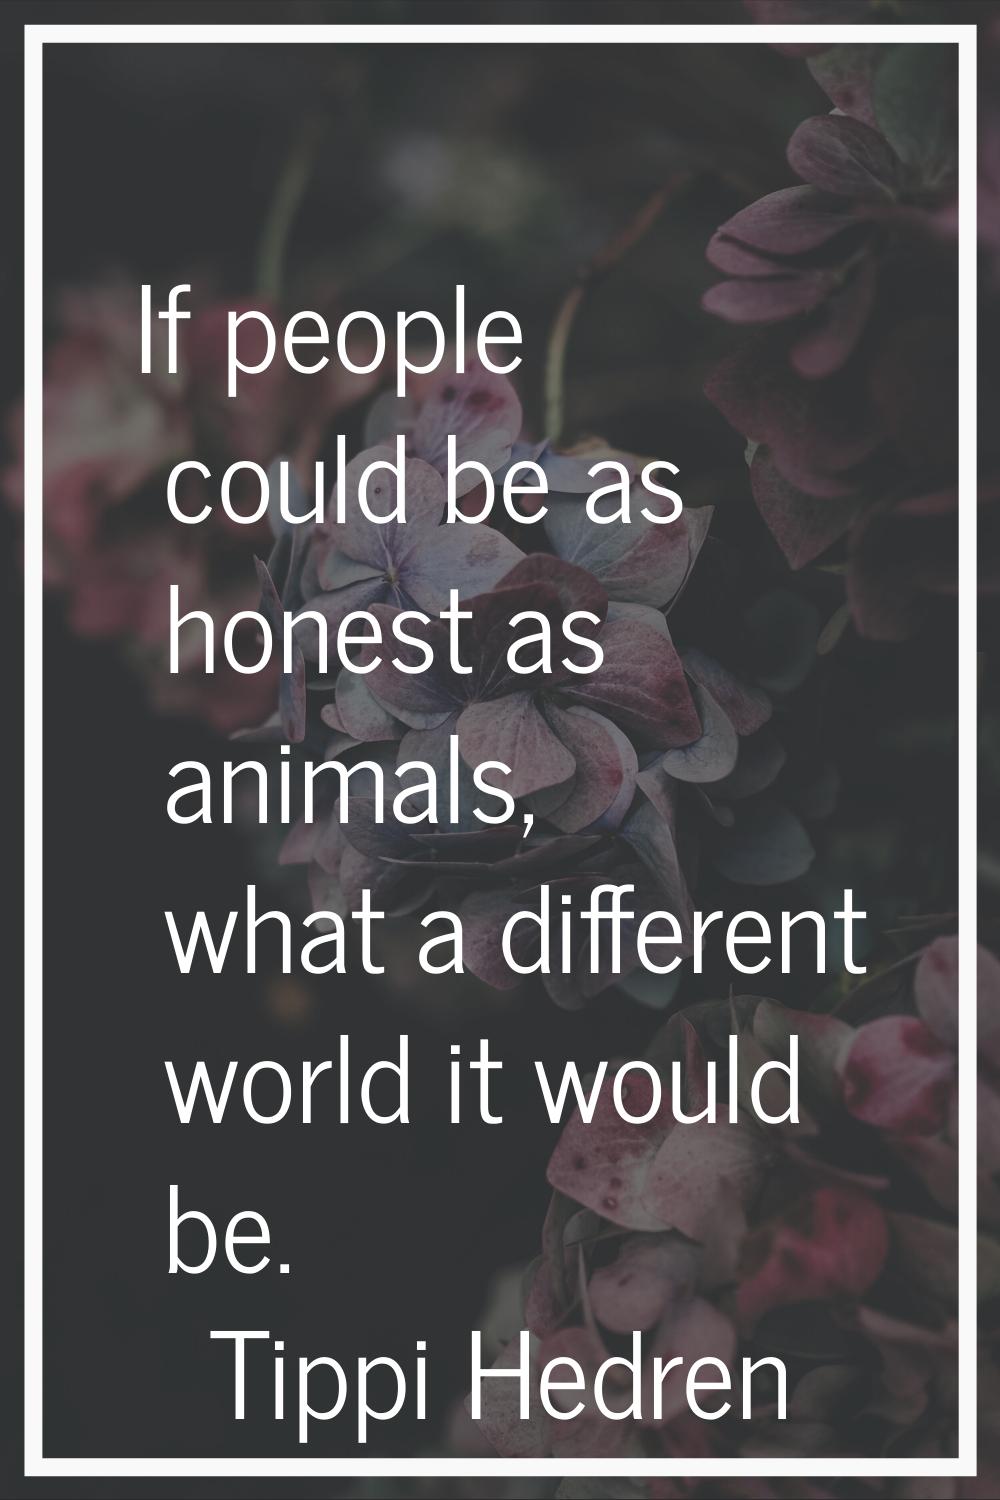 If people could be as honest as animals, what a different world it would be.